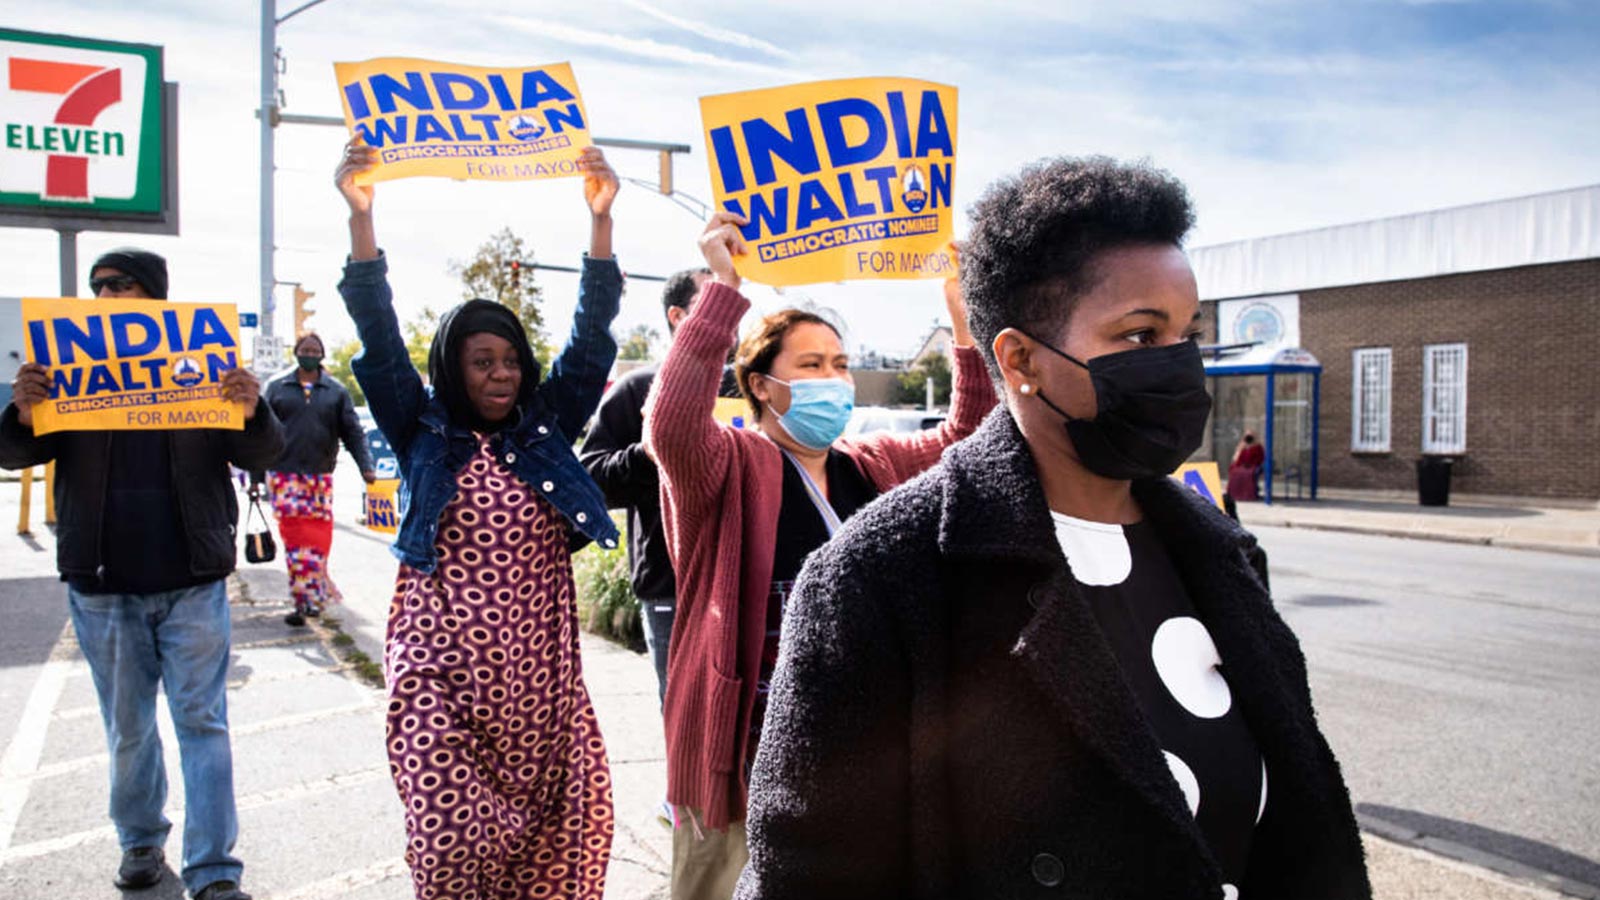 India Walton’s mayoral defeat in Buffalo sets dangerous precedents for the left